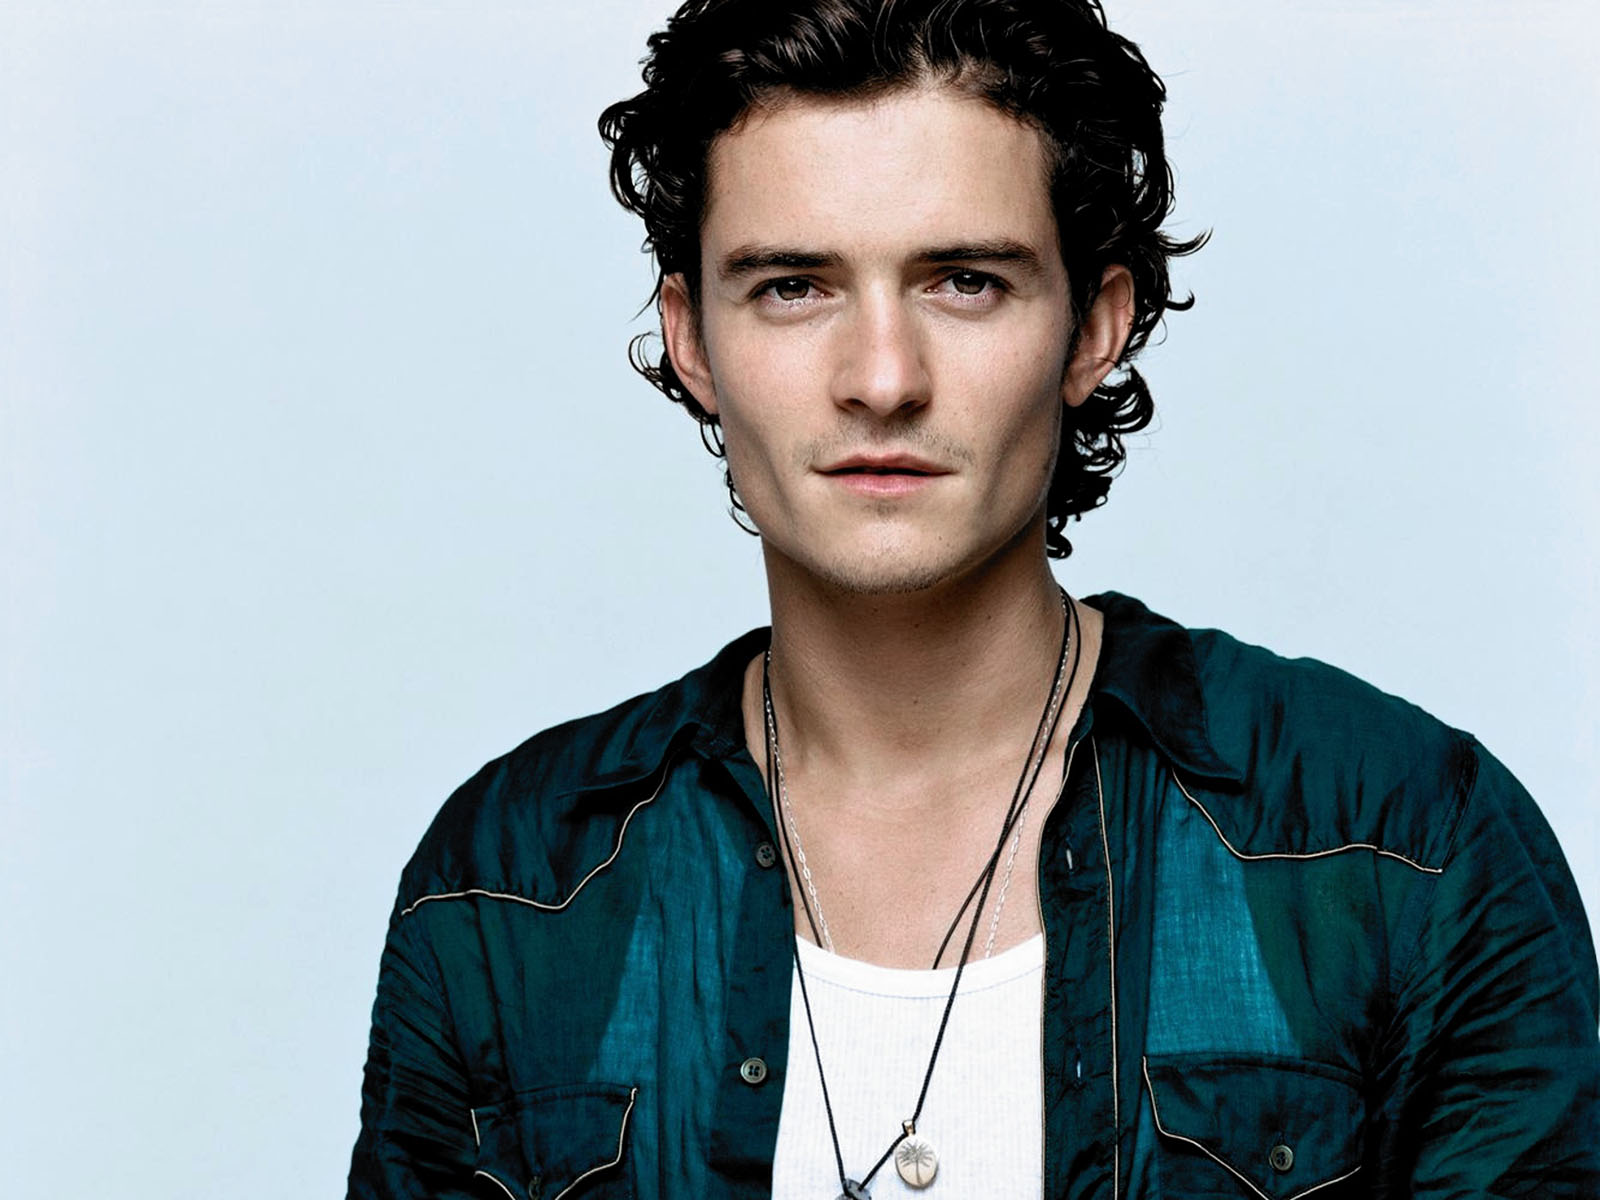 Orlando Bloom pictures